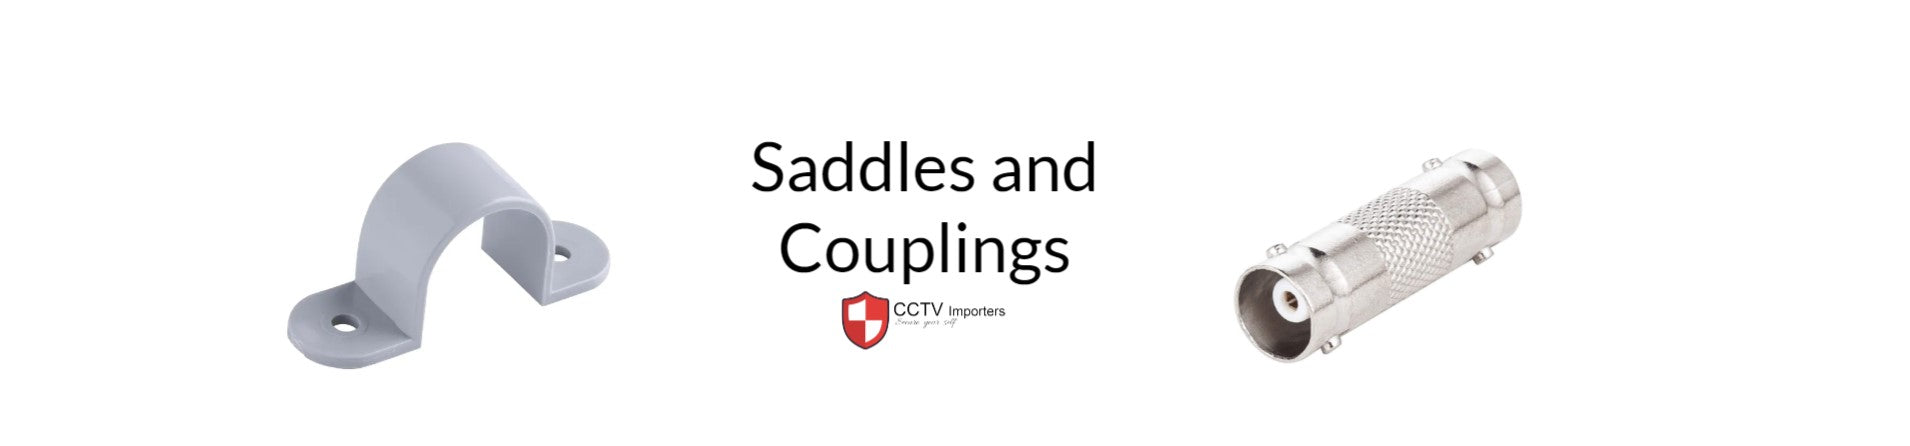 Saddles and Couplings